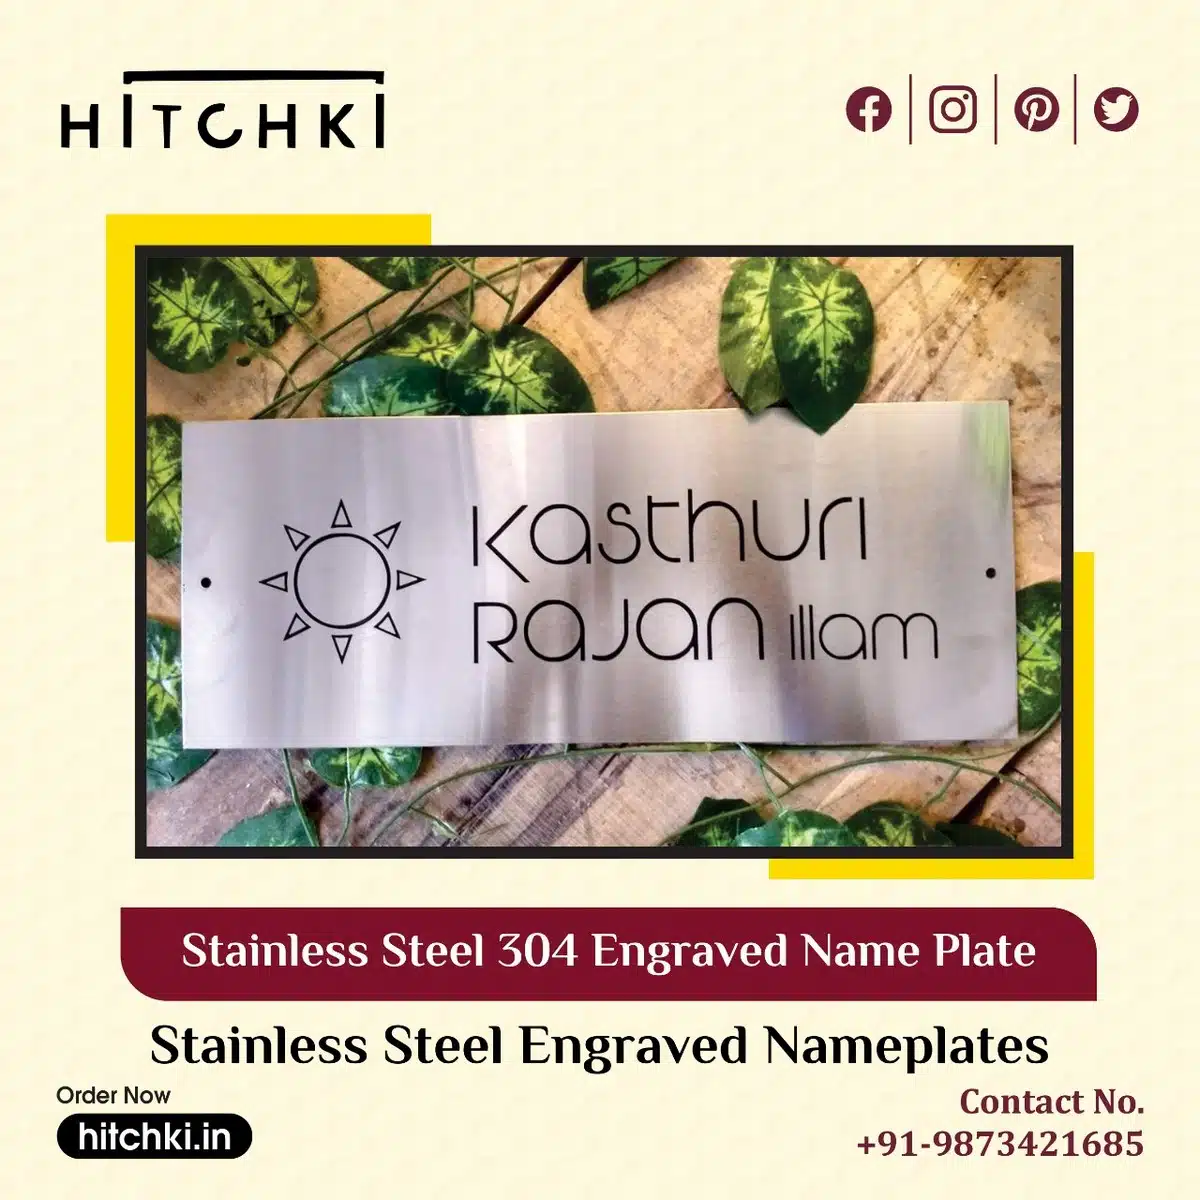 Best Stainless Steel Engraved Nameplates For Your Home